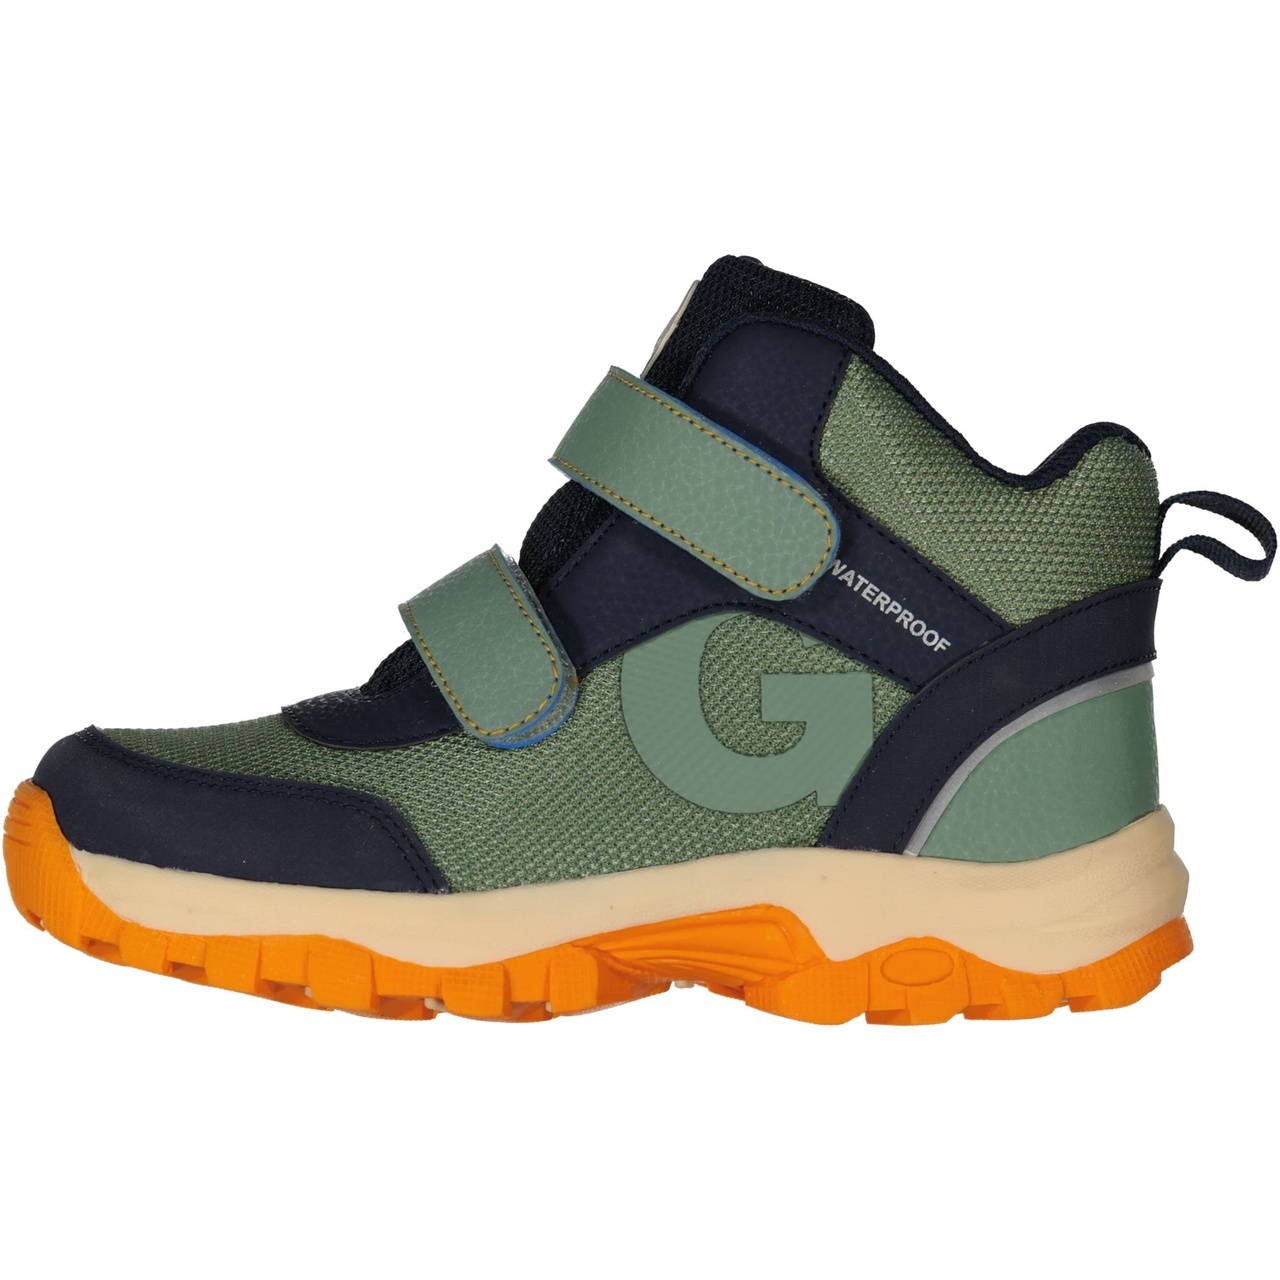 All weather shoes Moss green 30 (19,7 cm)